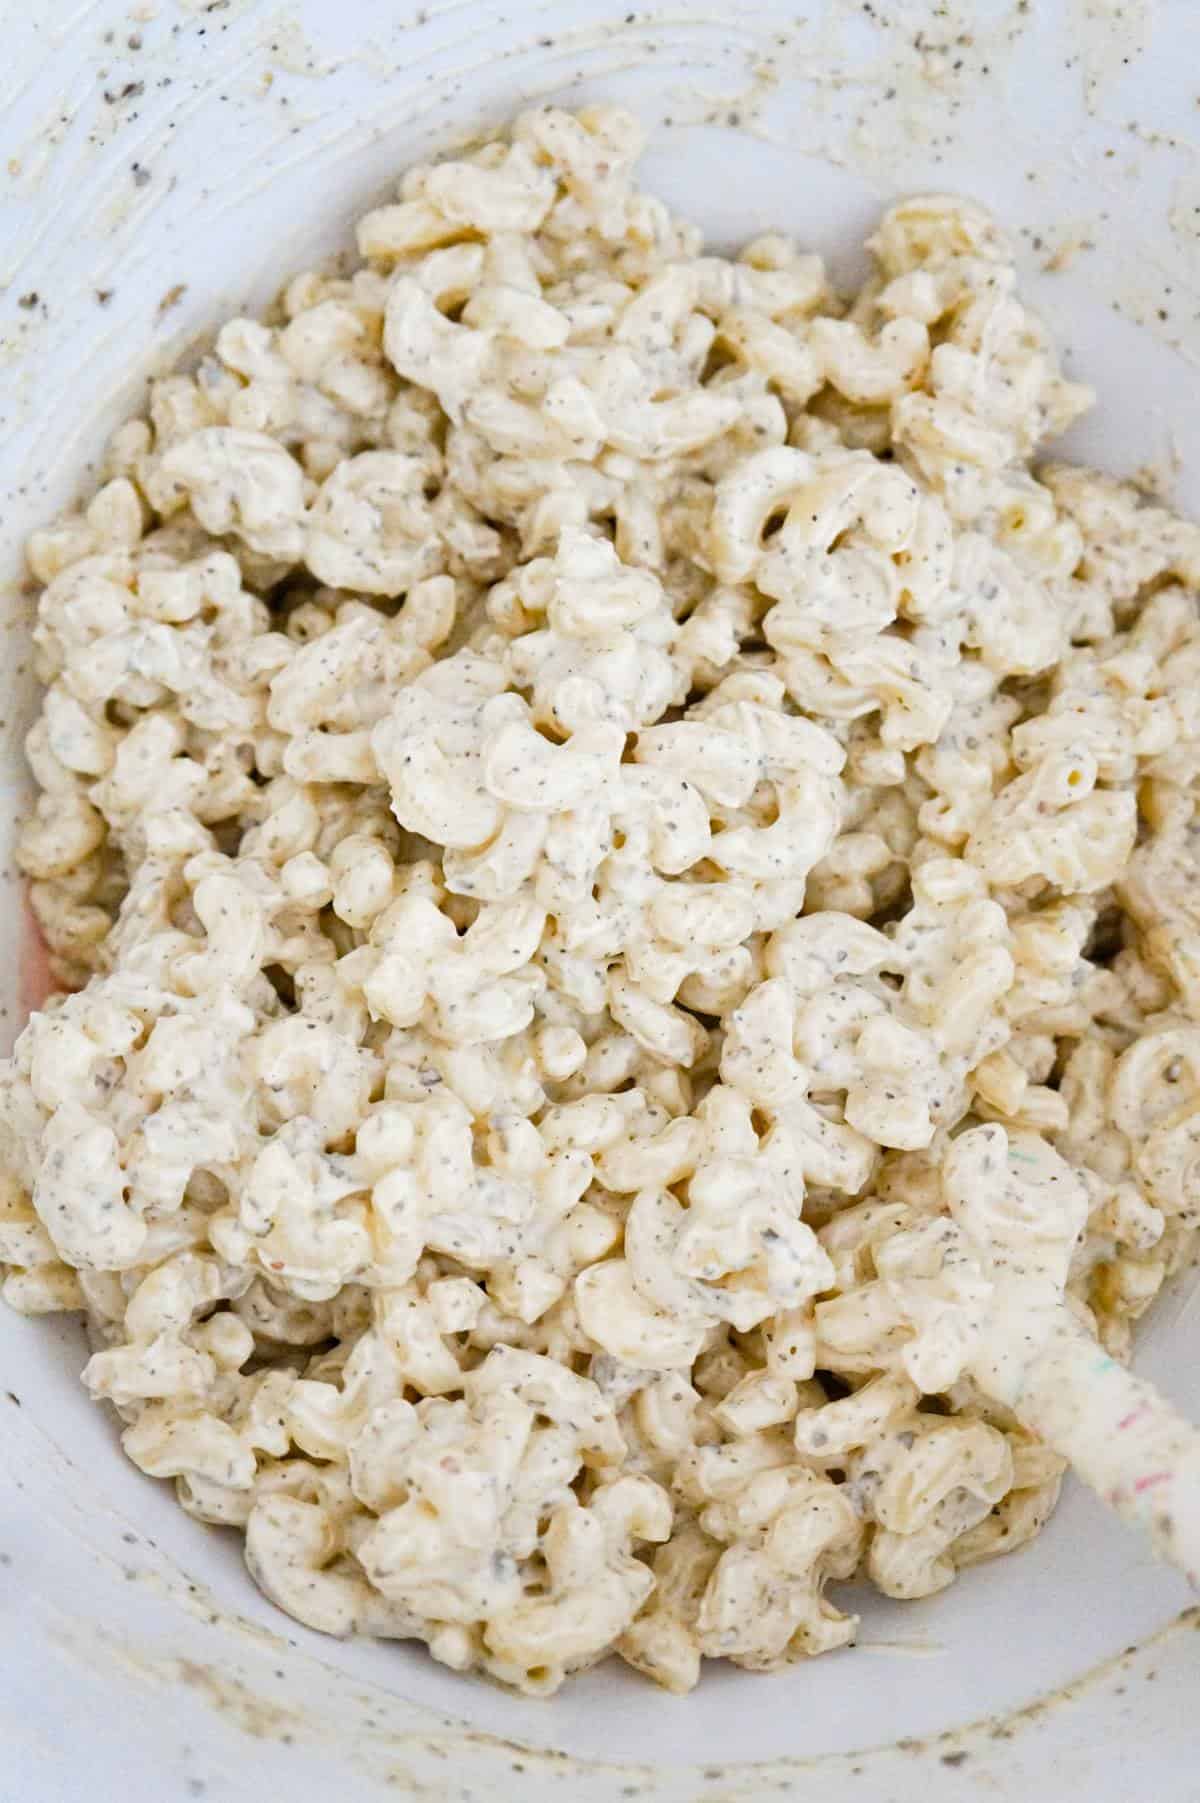 macaroni coated with mayo and basil pesto mixture in a mixing bowl